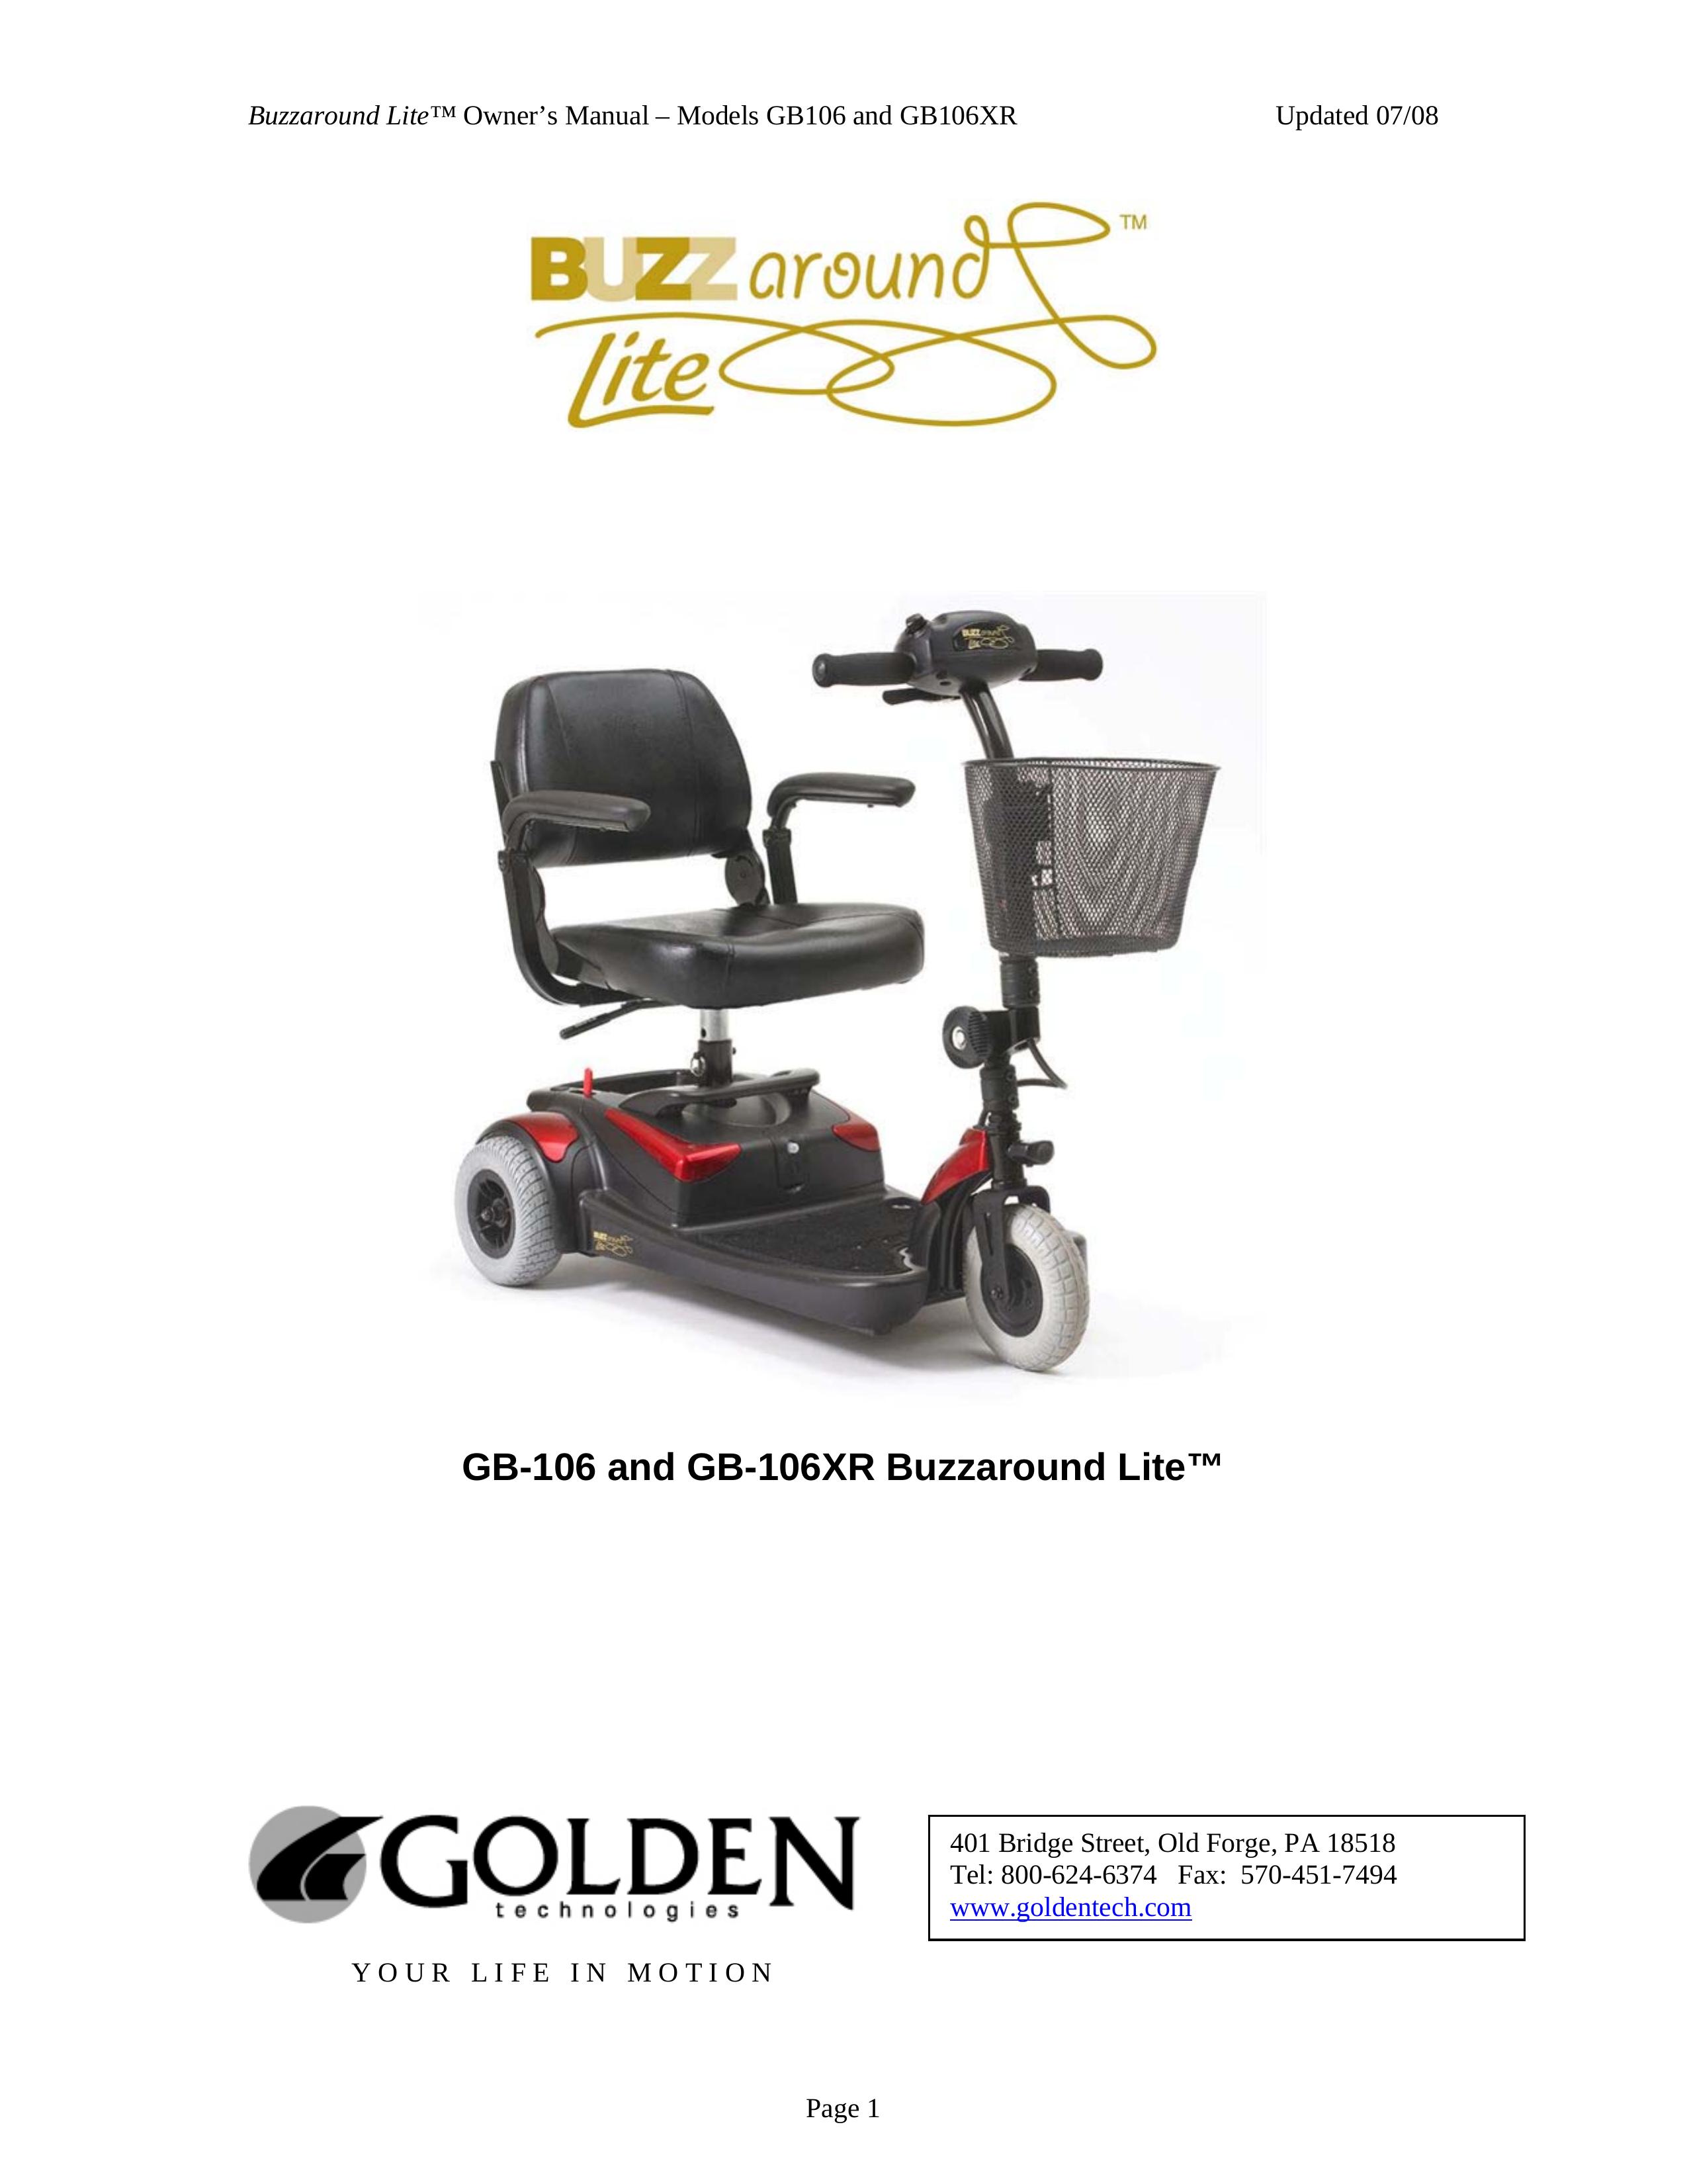 Golden Technologies GB106 Mobility Scooter User Manual